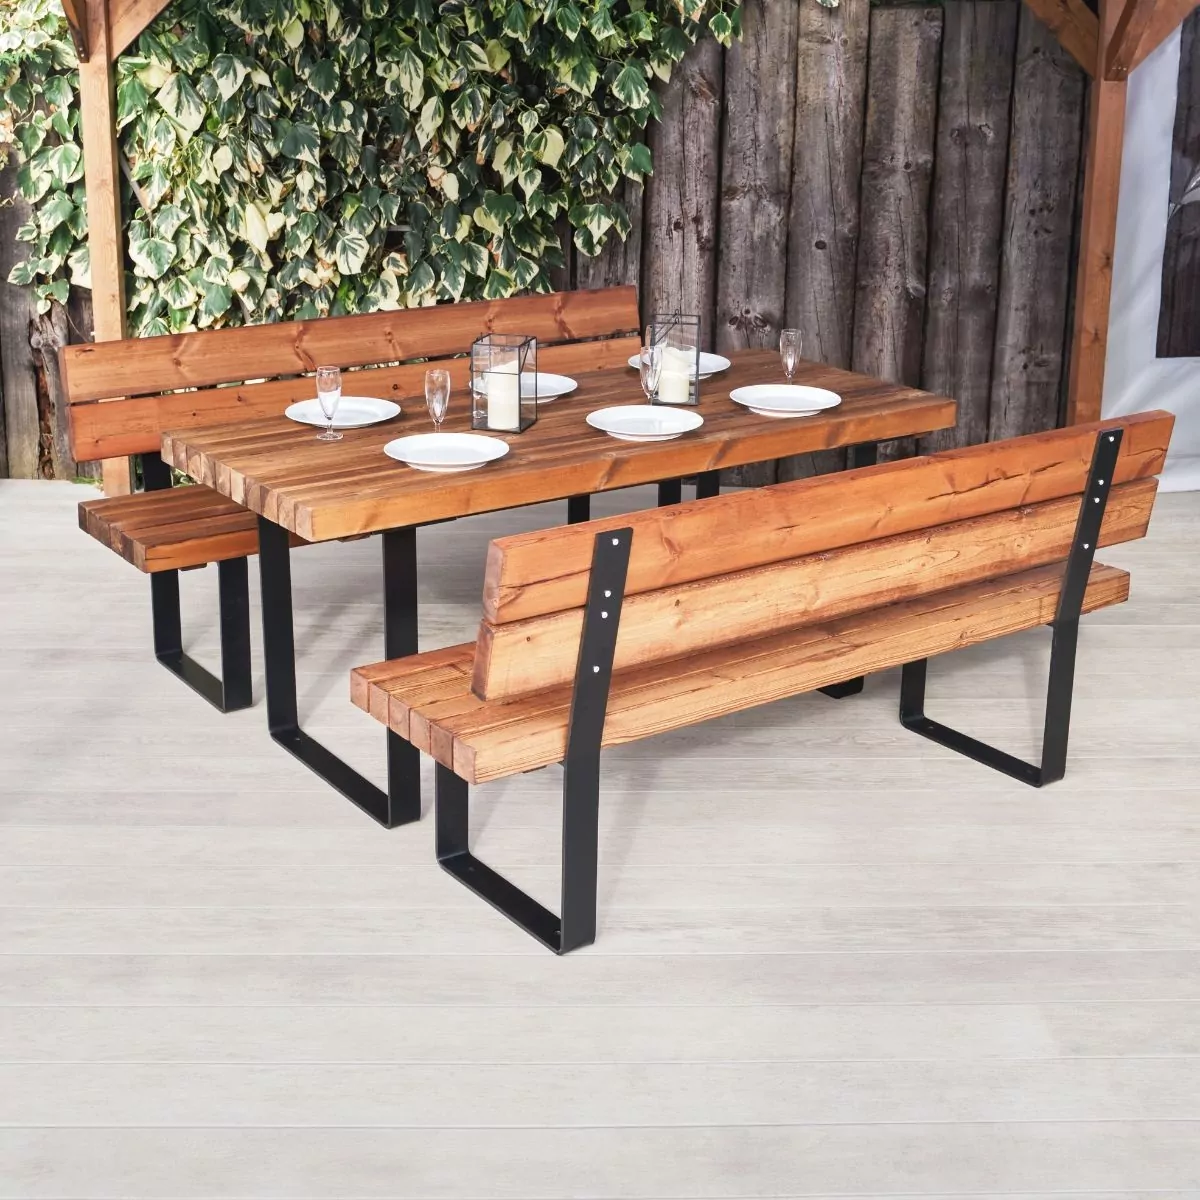 wood-and-metal-industrial-outdoor-commercial-bench-with-back-and-plates.jpg